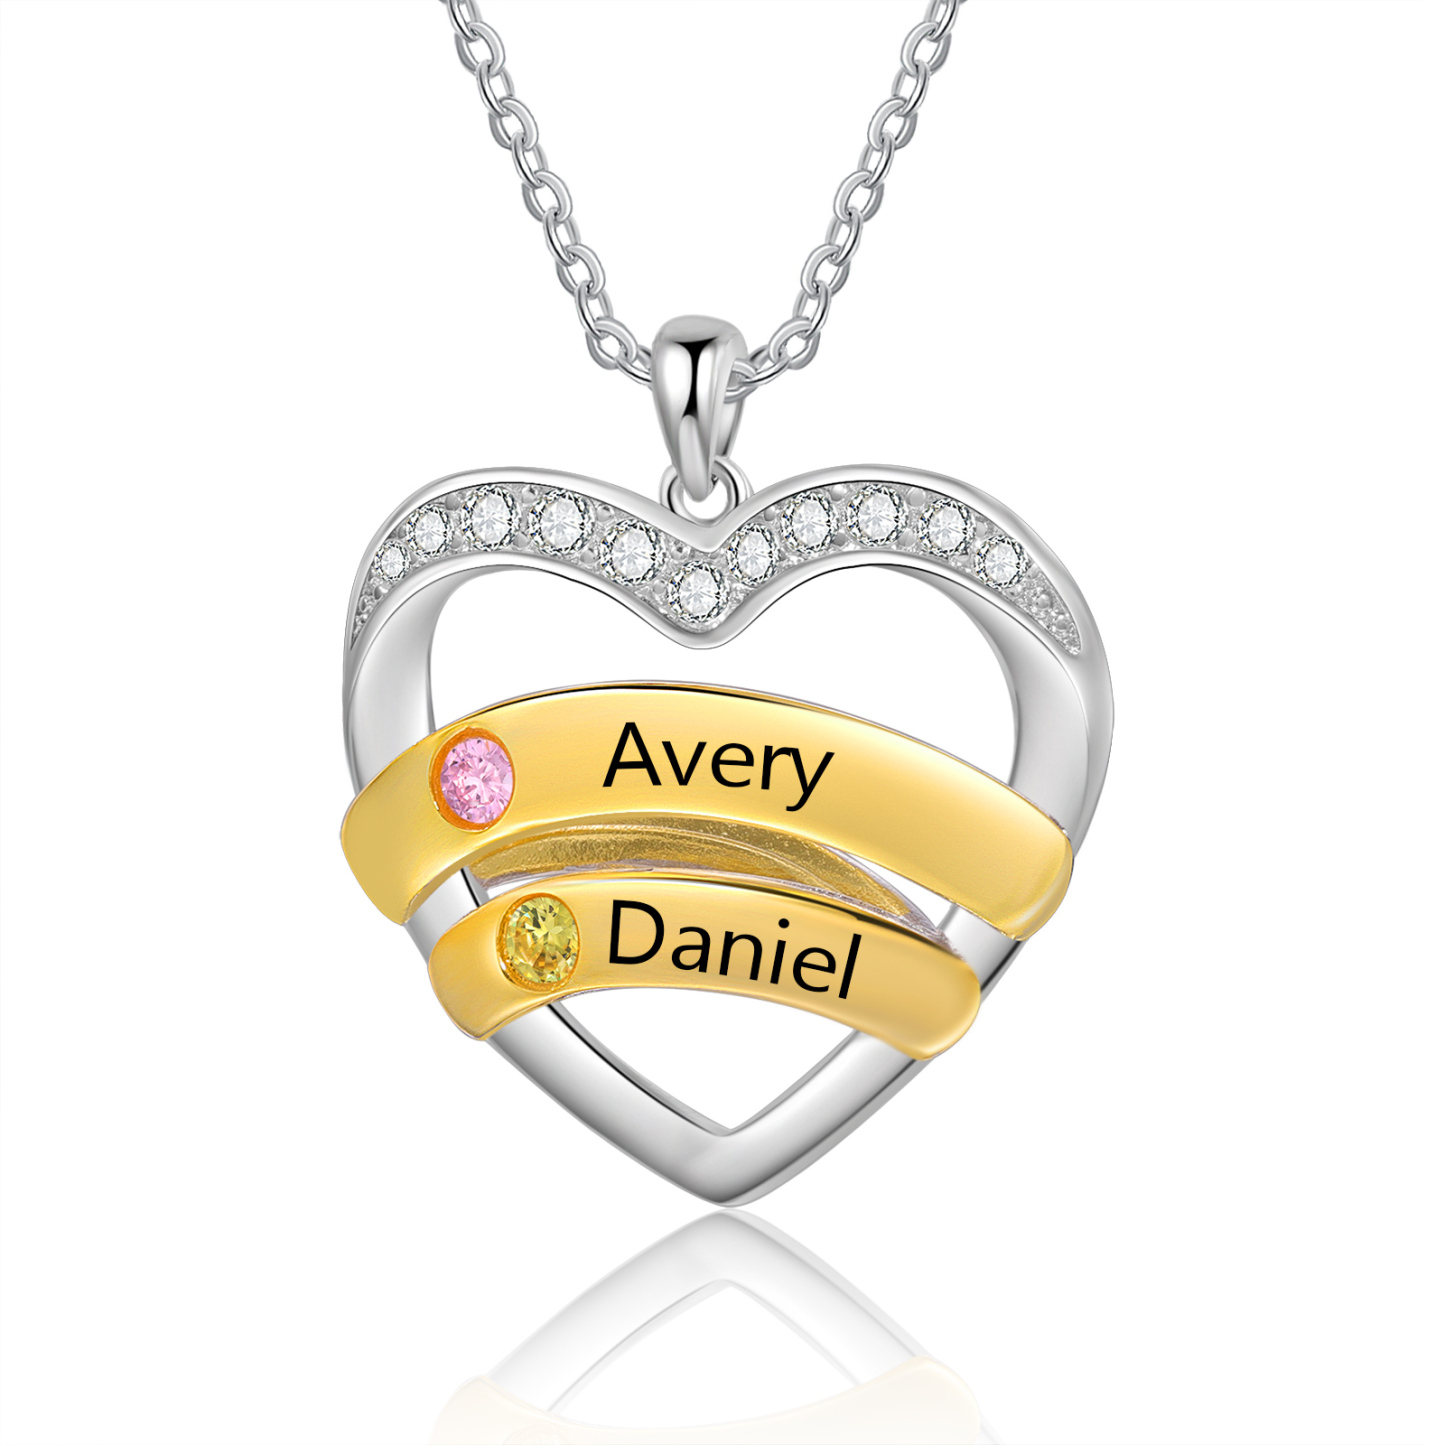 2 Names - Personalized Beautiful Heart Necklace with Custom Name and B